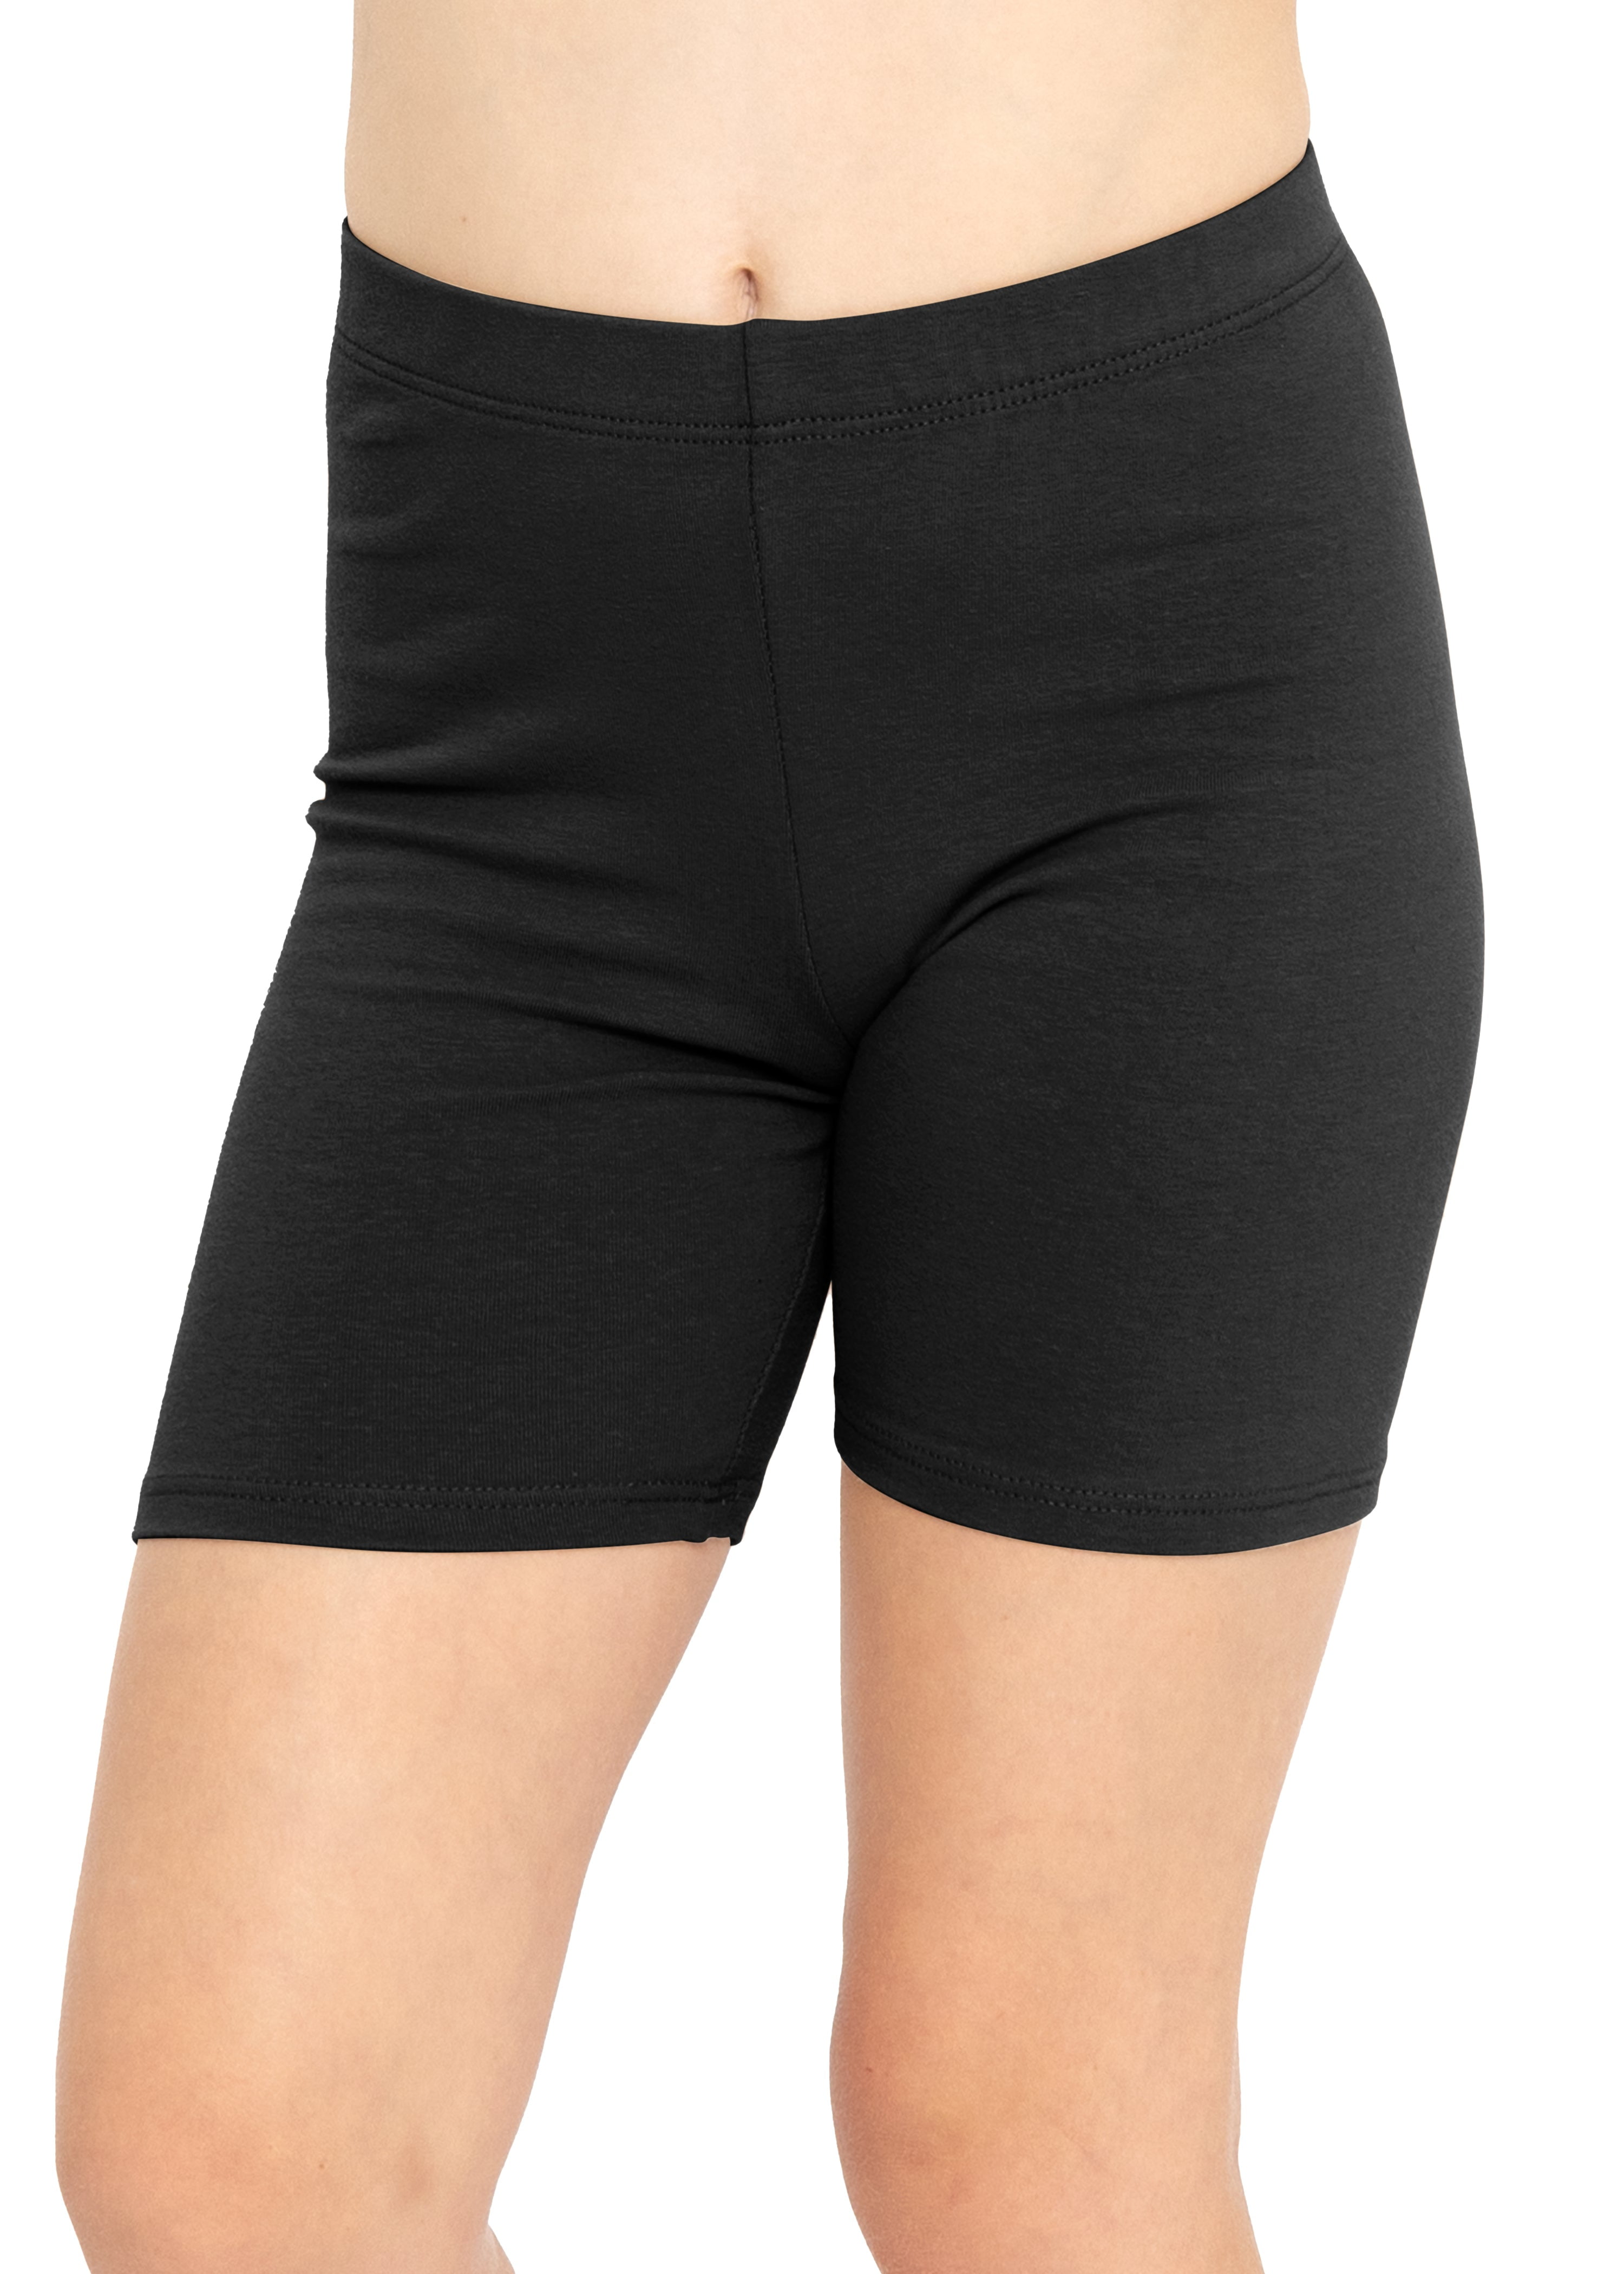 Stretch Is Comfort Premium Stretch Youth Girls Oh so Soft Biker Shorts